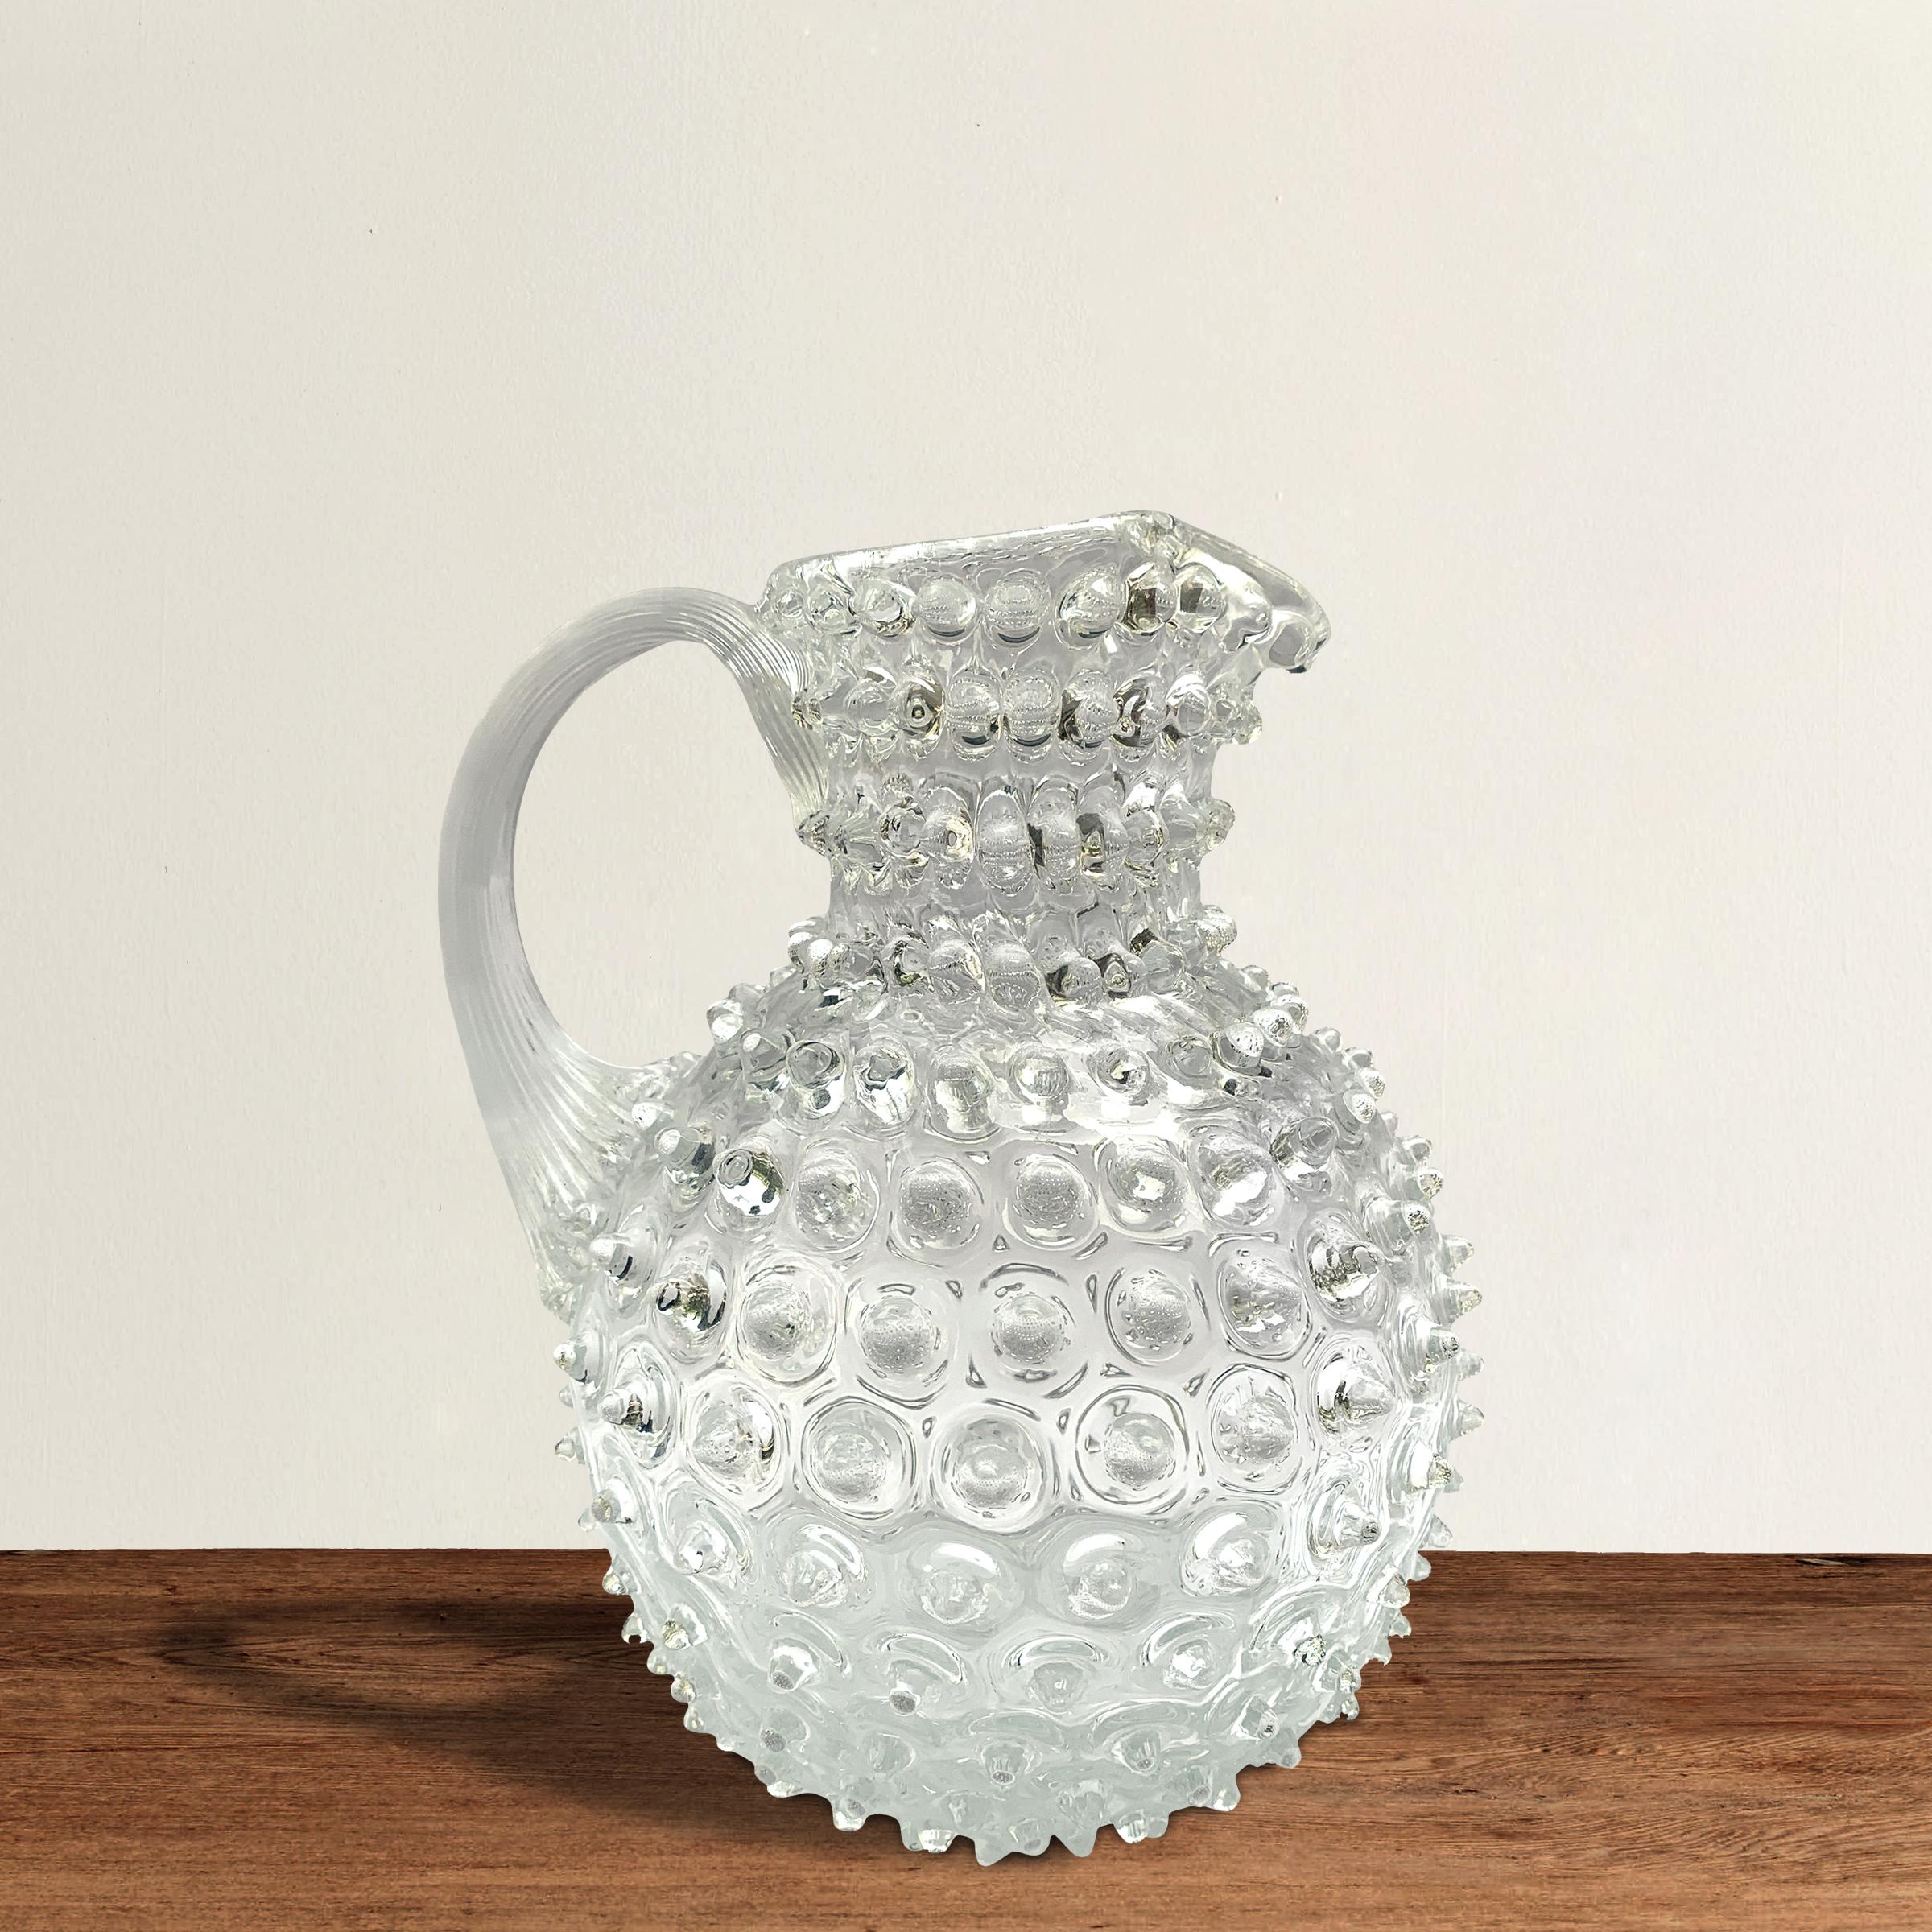 A beautiful vintage hand blown glass pitcher with hundreds of hobnails covering the surface, and a pulled applied handle.